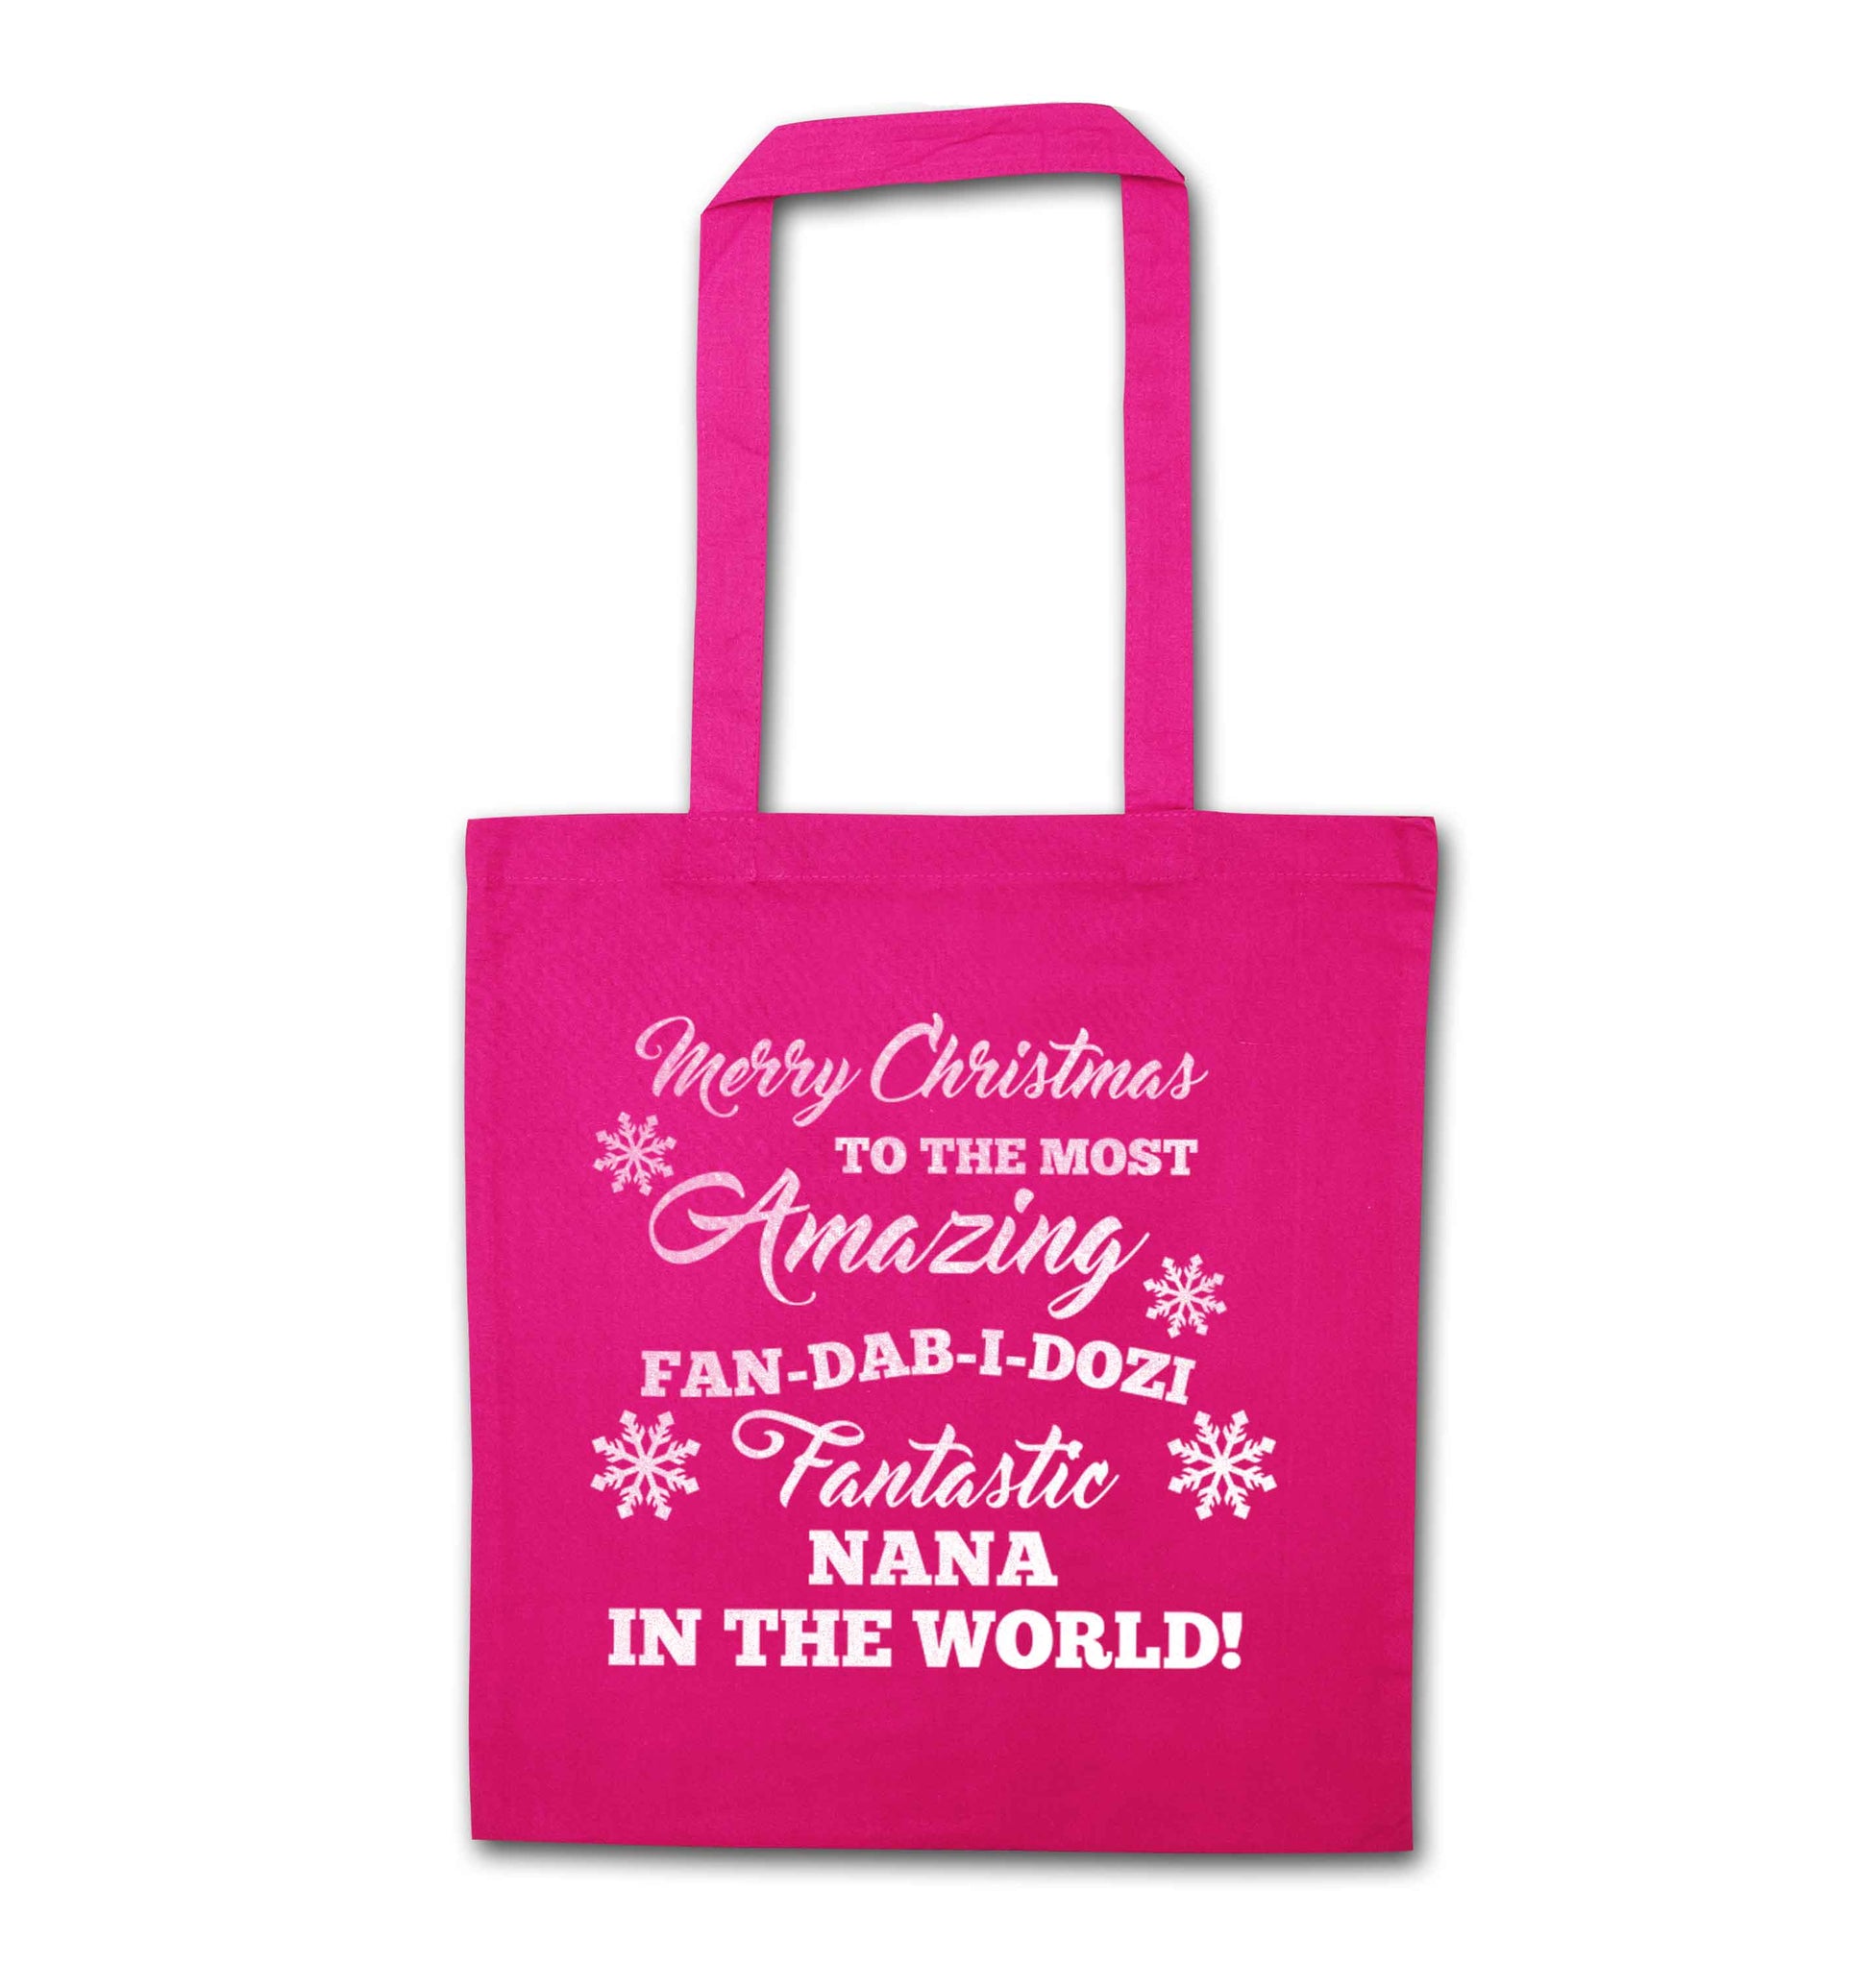 Merry Christmas to the most amazing fan-dab-i-dozi fantasic Nana in the world pink tote bag